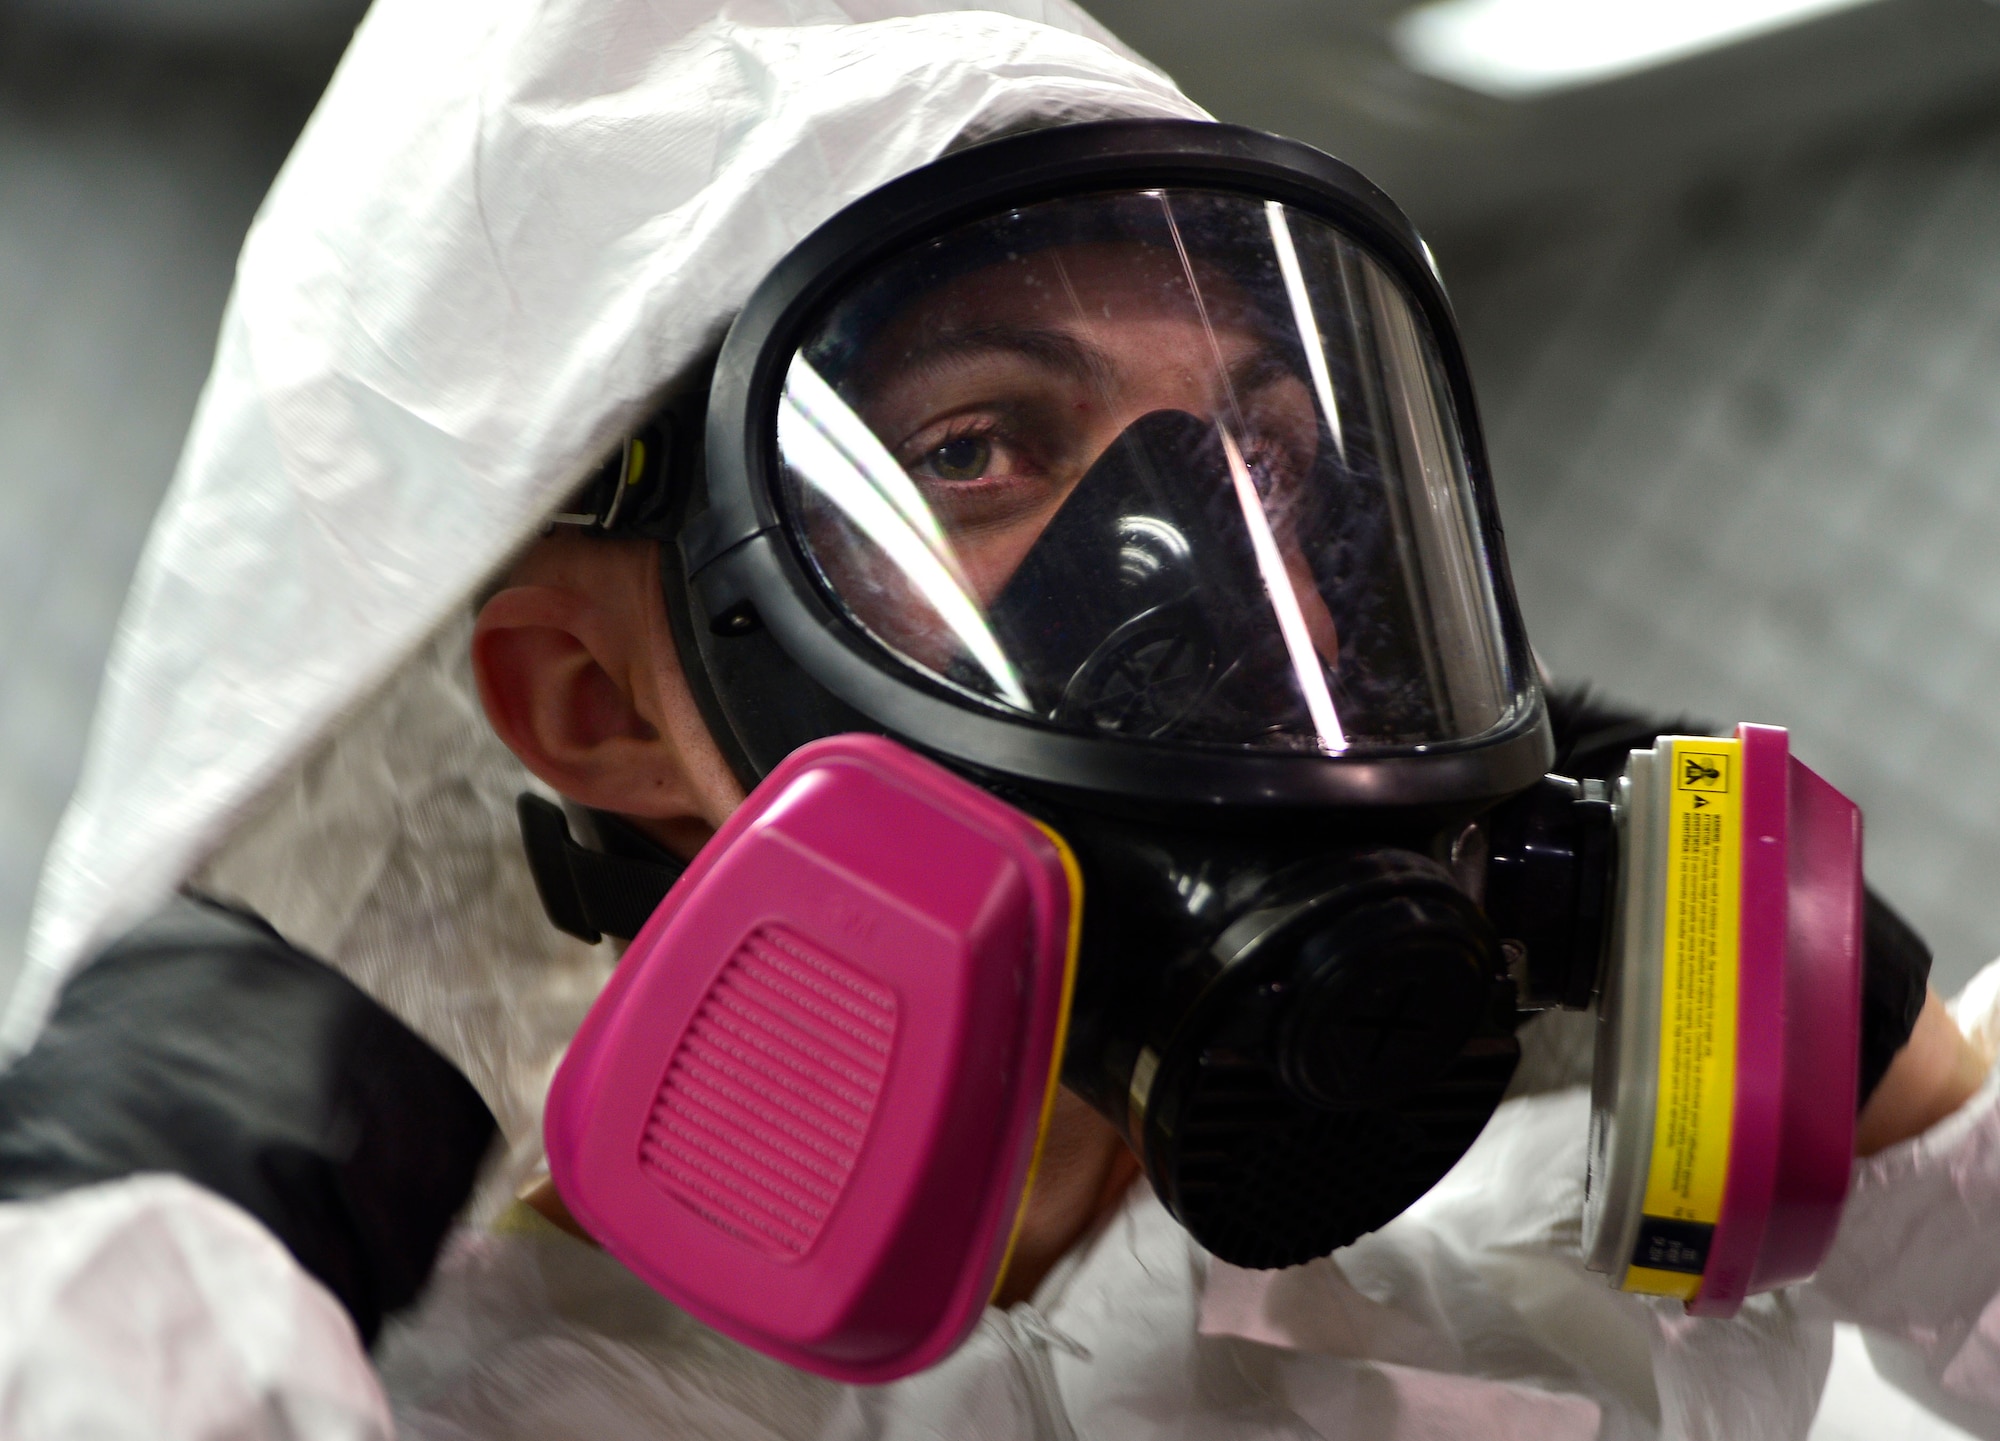 Senior Airman Joshua, 432nd Maintenance Squadron aircraft structural maintenance journeyman dons a mask designed to keep hazardous paint and composite particles from being breathed in before sanding a panel for the MQ-1 Predator Feb. 18, 2016, at Creech Air Force Base, Nevada. The aircraft structural maintenance shop is responsible for the repair and fabrication of aircraft skin, structures, metallic tube assemblies, windows, canopies and corrosion control for the MQ-1 Predator and MQ-9 Reaper. (U.S. Air Force photo by Senior Airman Christian Clausen/Released)